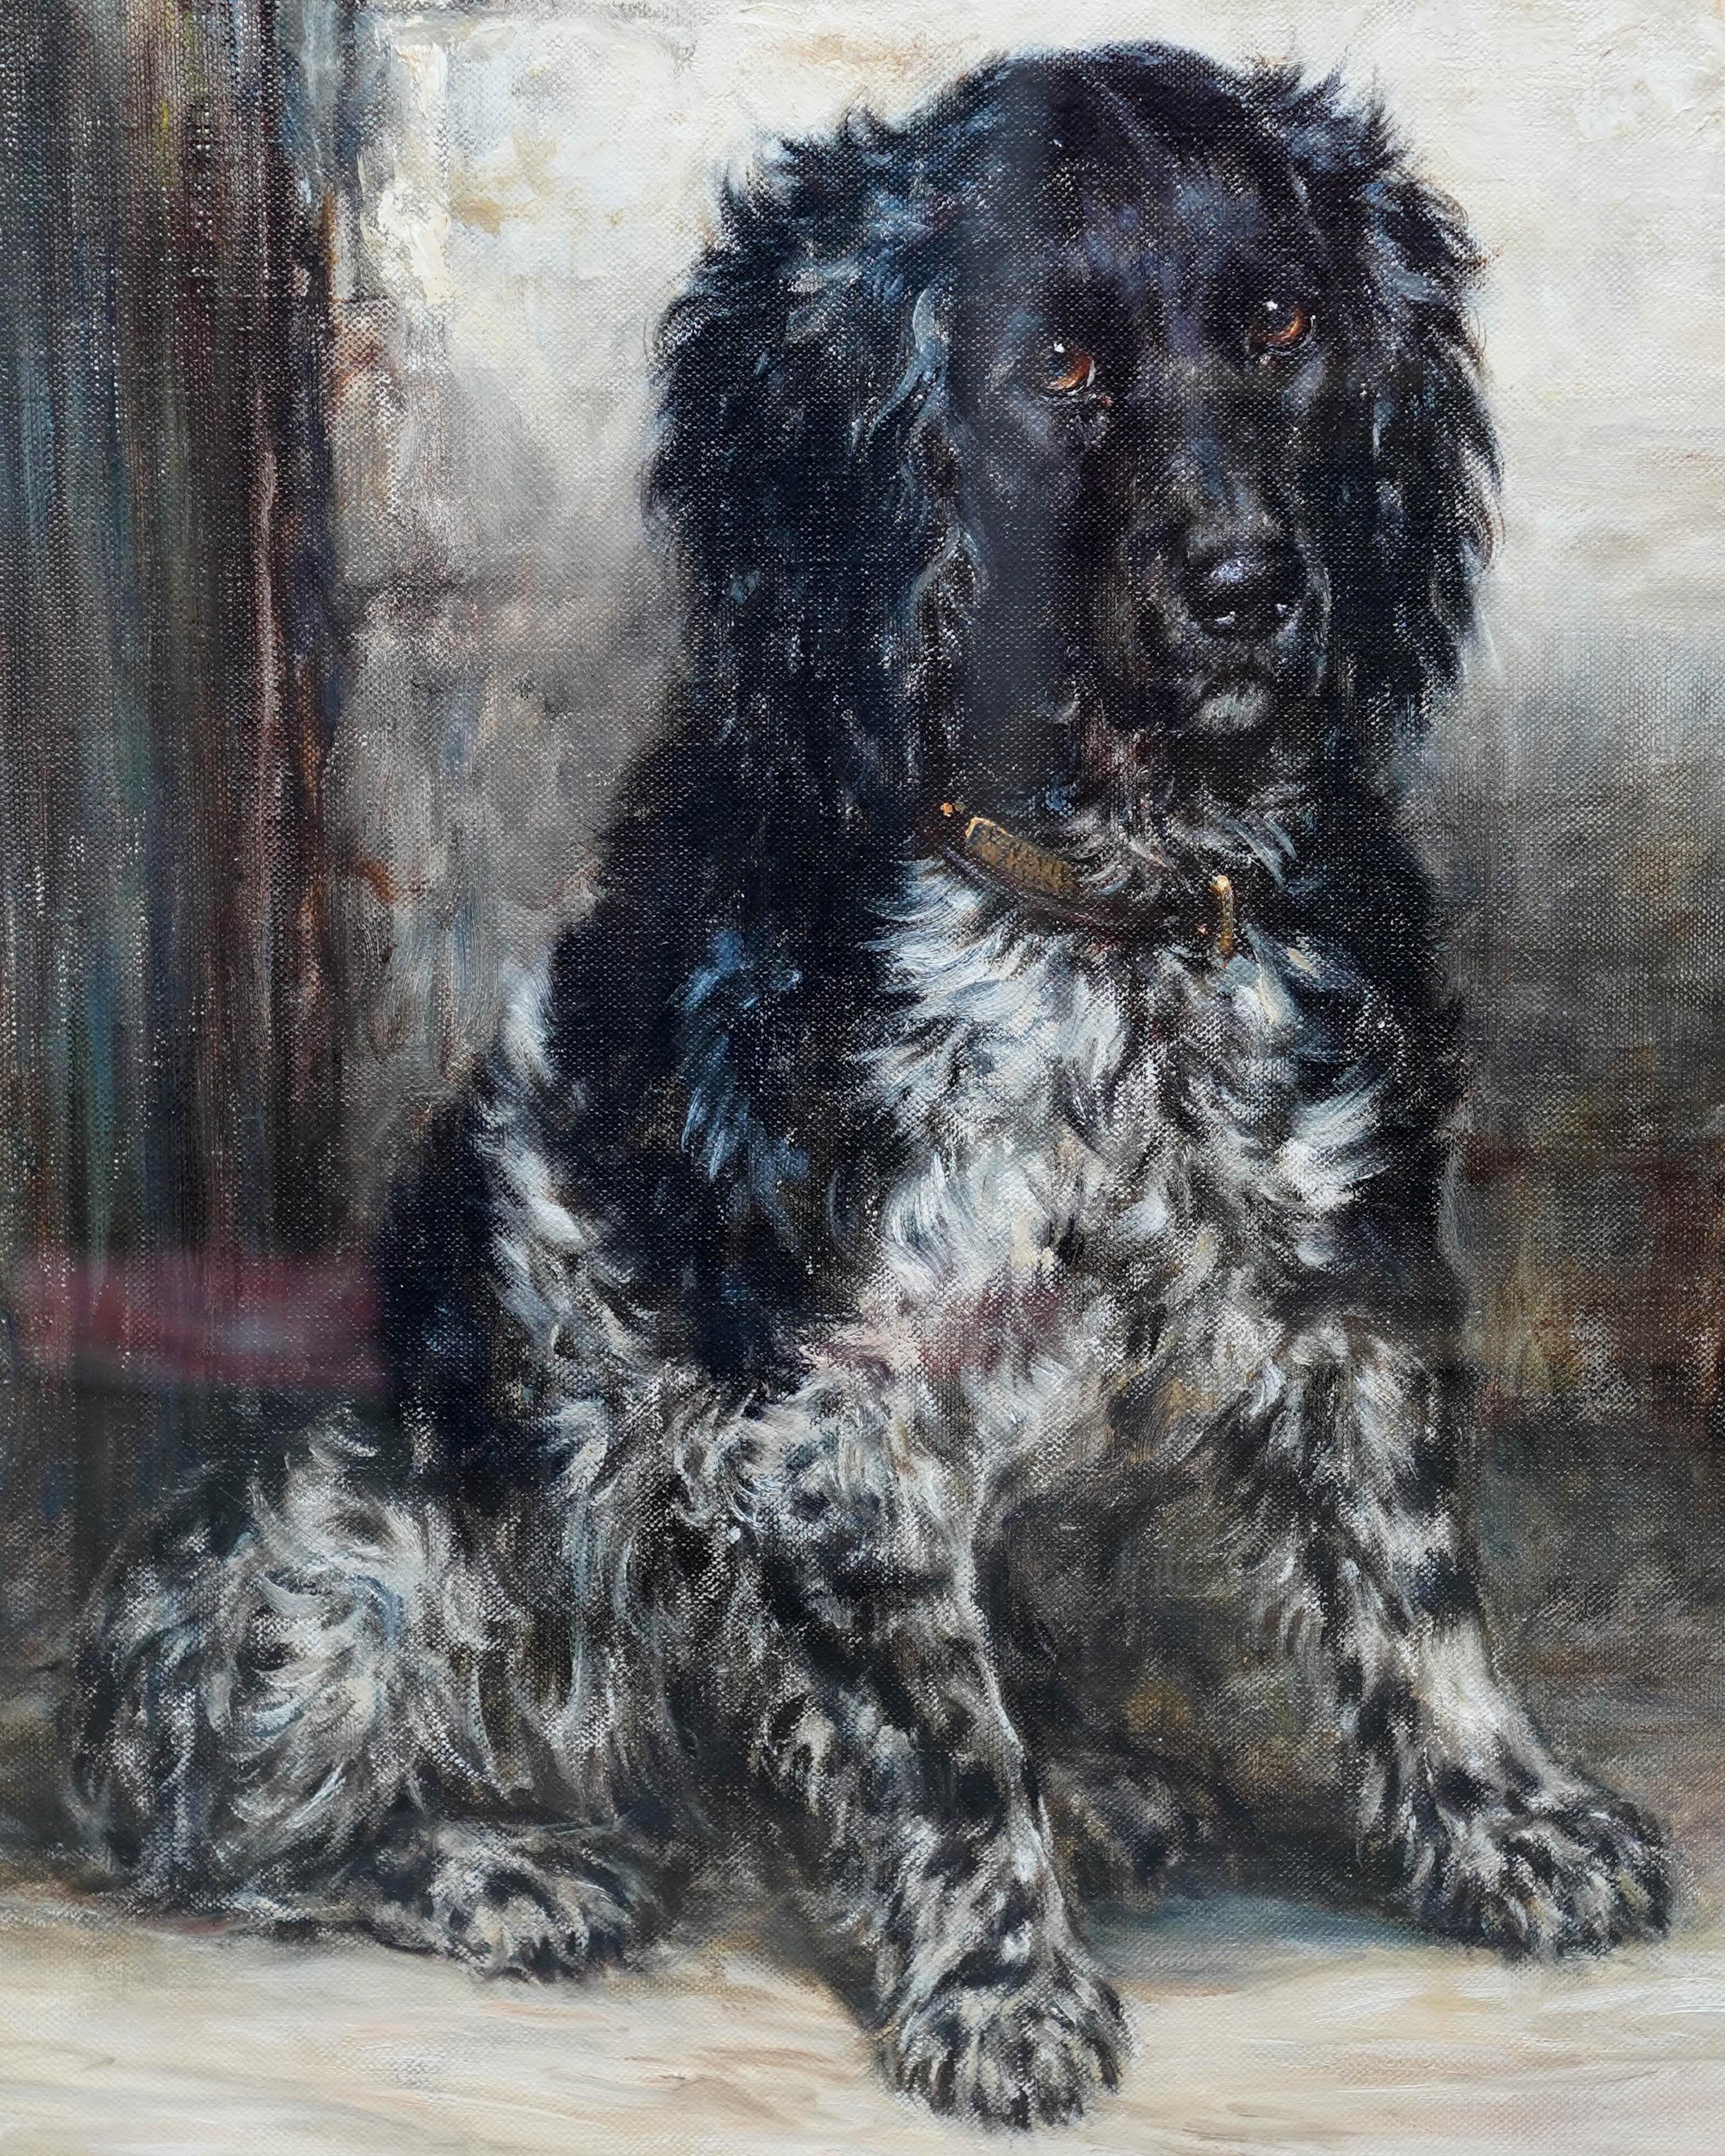 This gorgeous British Edwardian dog portrait oil painting is by noted animal artist Robert Morley. Painted circa 1910 the composition is of a black and white spaniel, sitting down, against a white wall and door way. The dog has a black face and